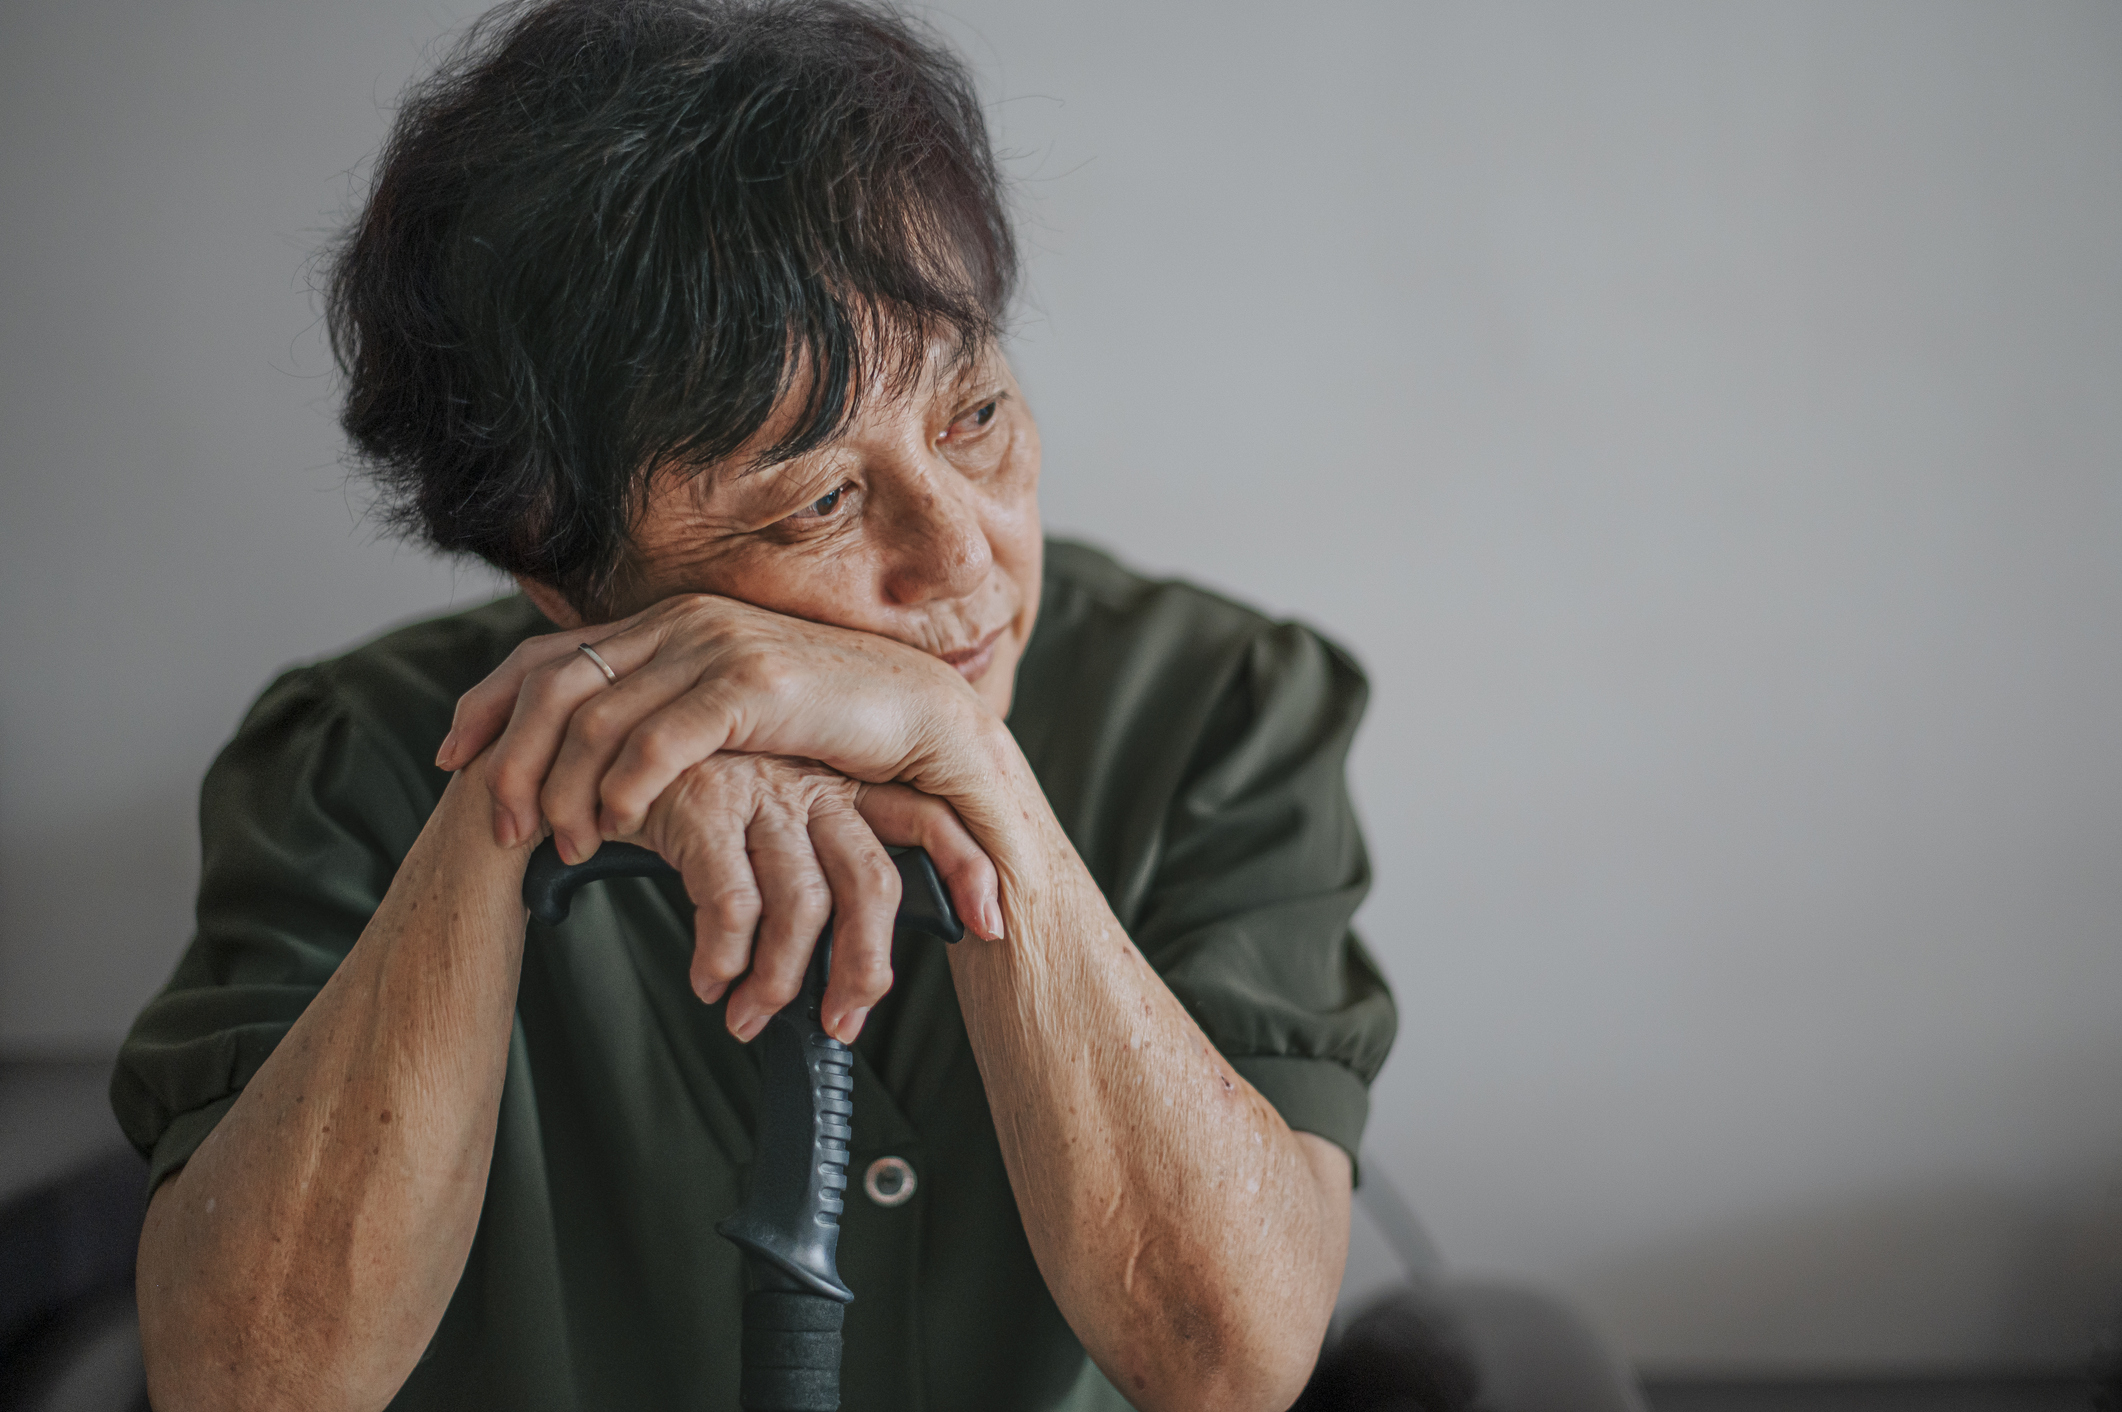 Elderly person resting chin on hands, leaning on a cane, thoughtful expression, in a discussion about retirement planning